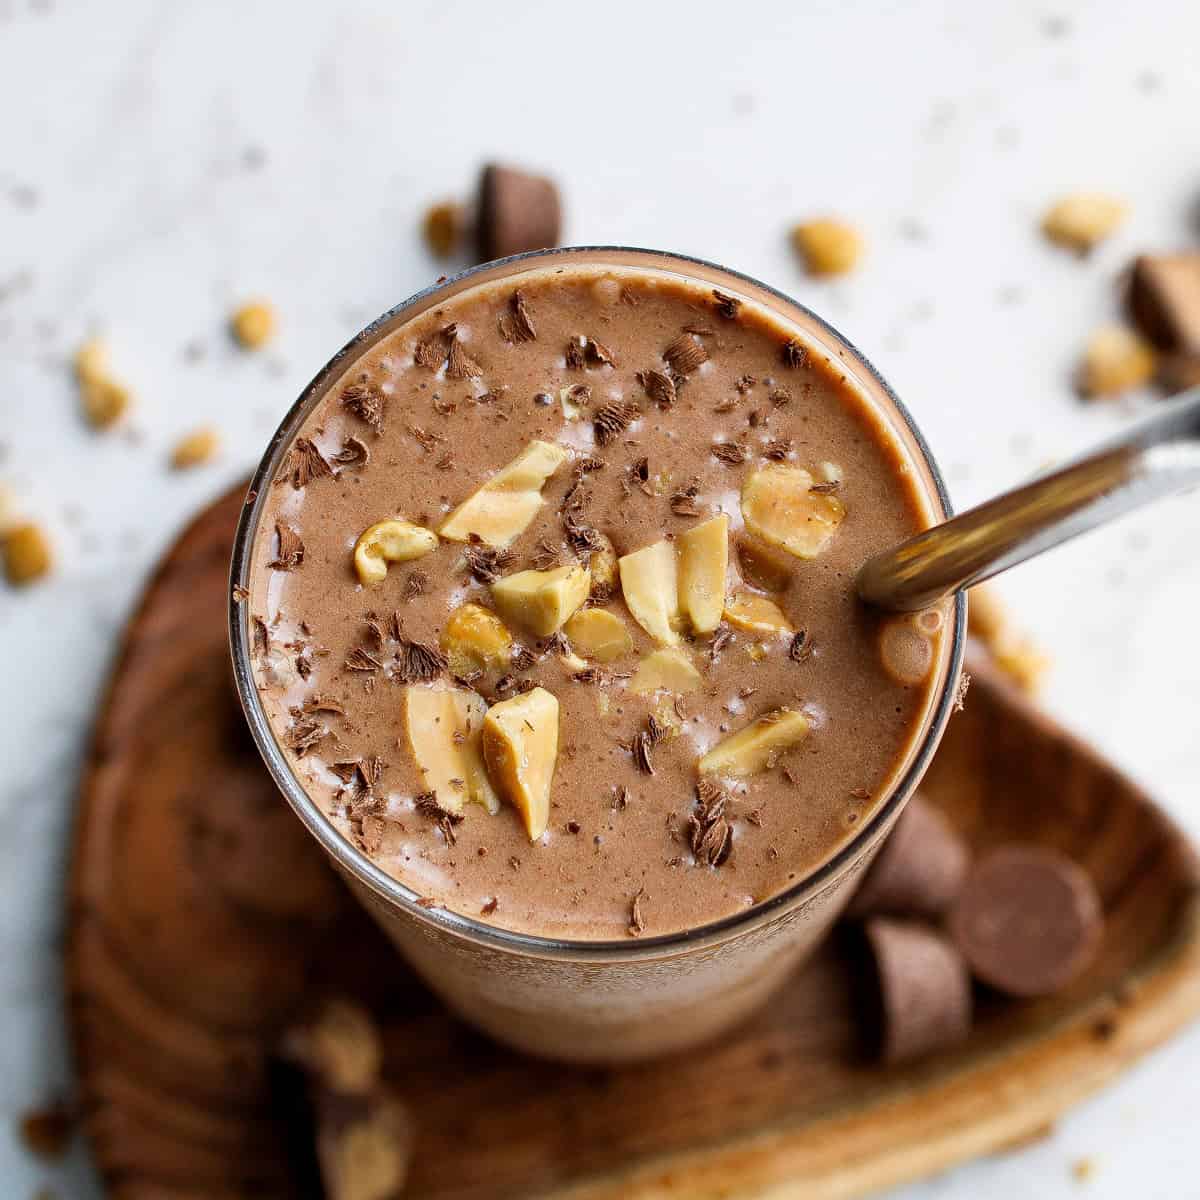 peanut butter chocolate smoothie in a glass with straw garnished with peanuts and chocolate shavings